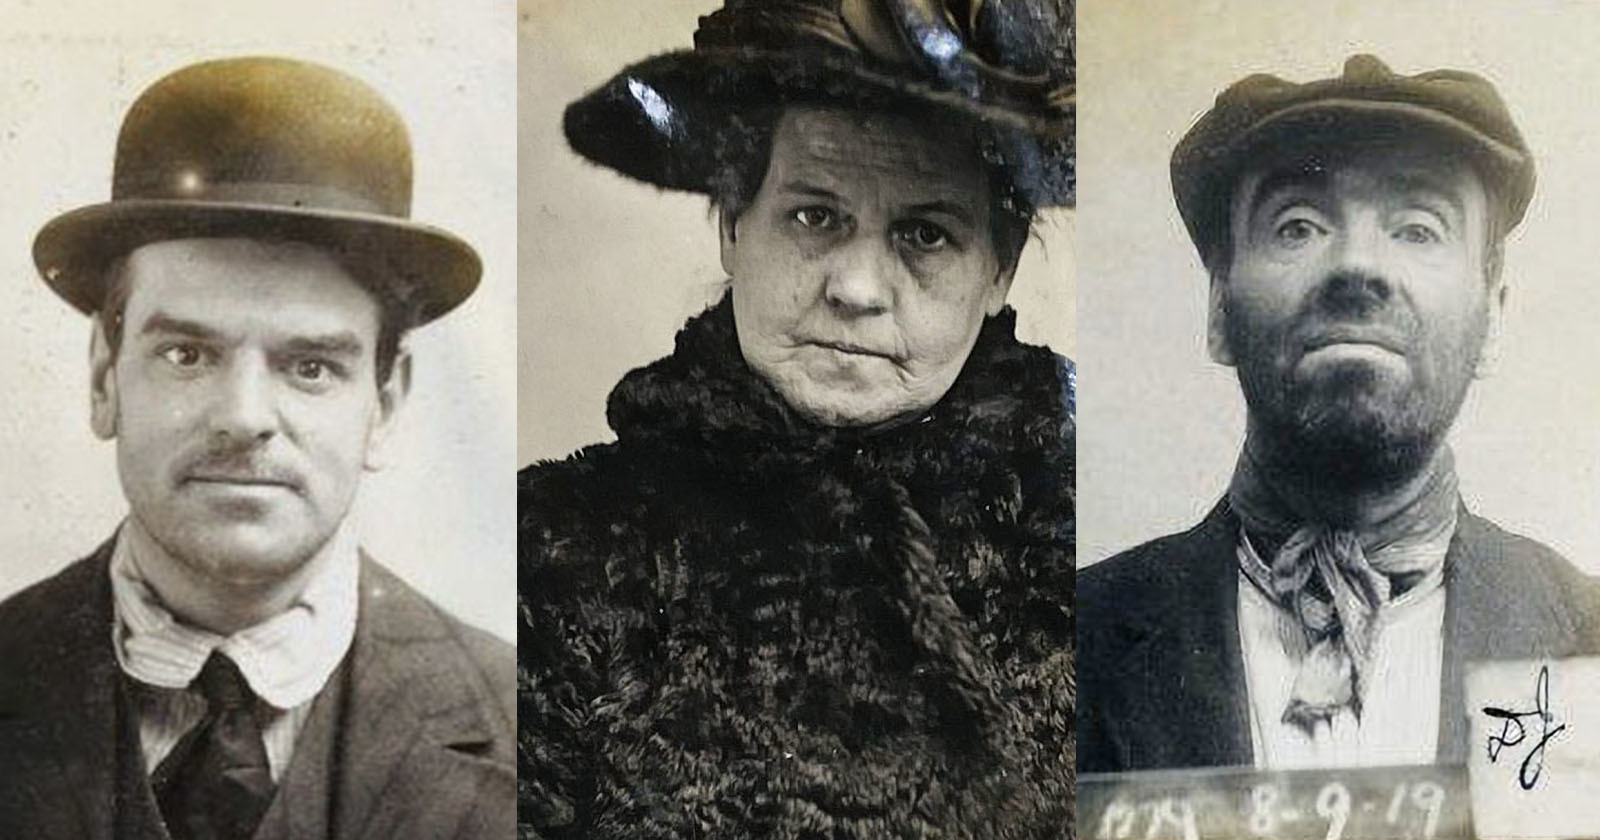  fascinating book victorian mugshot photos saved from dumpster 